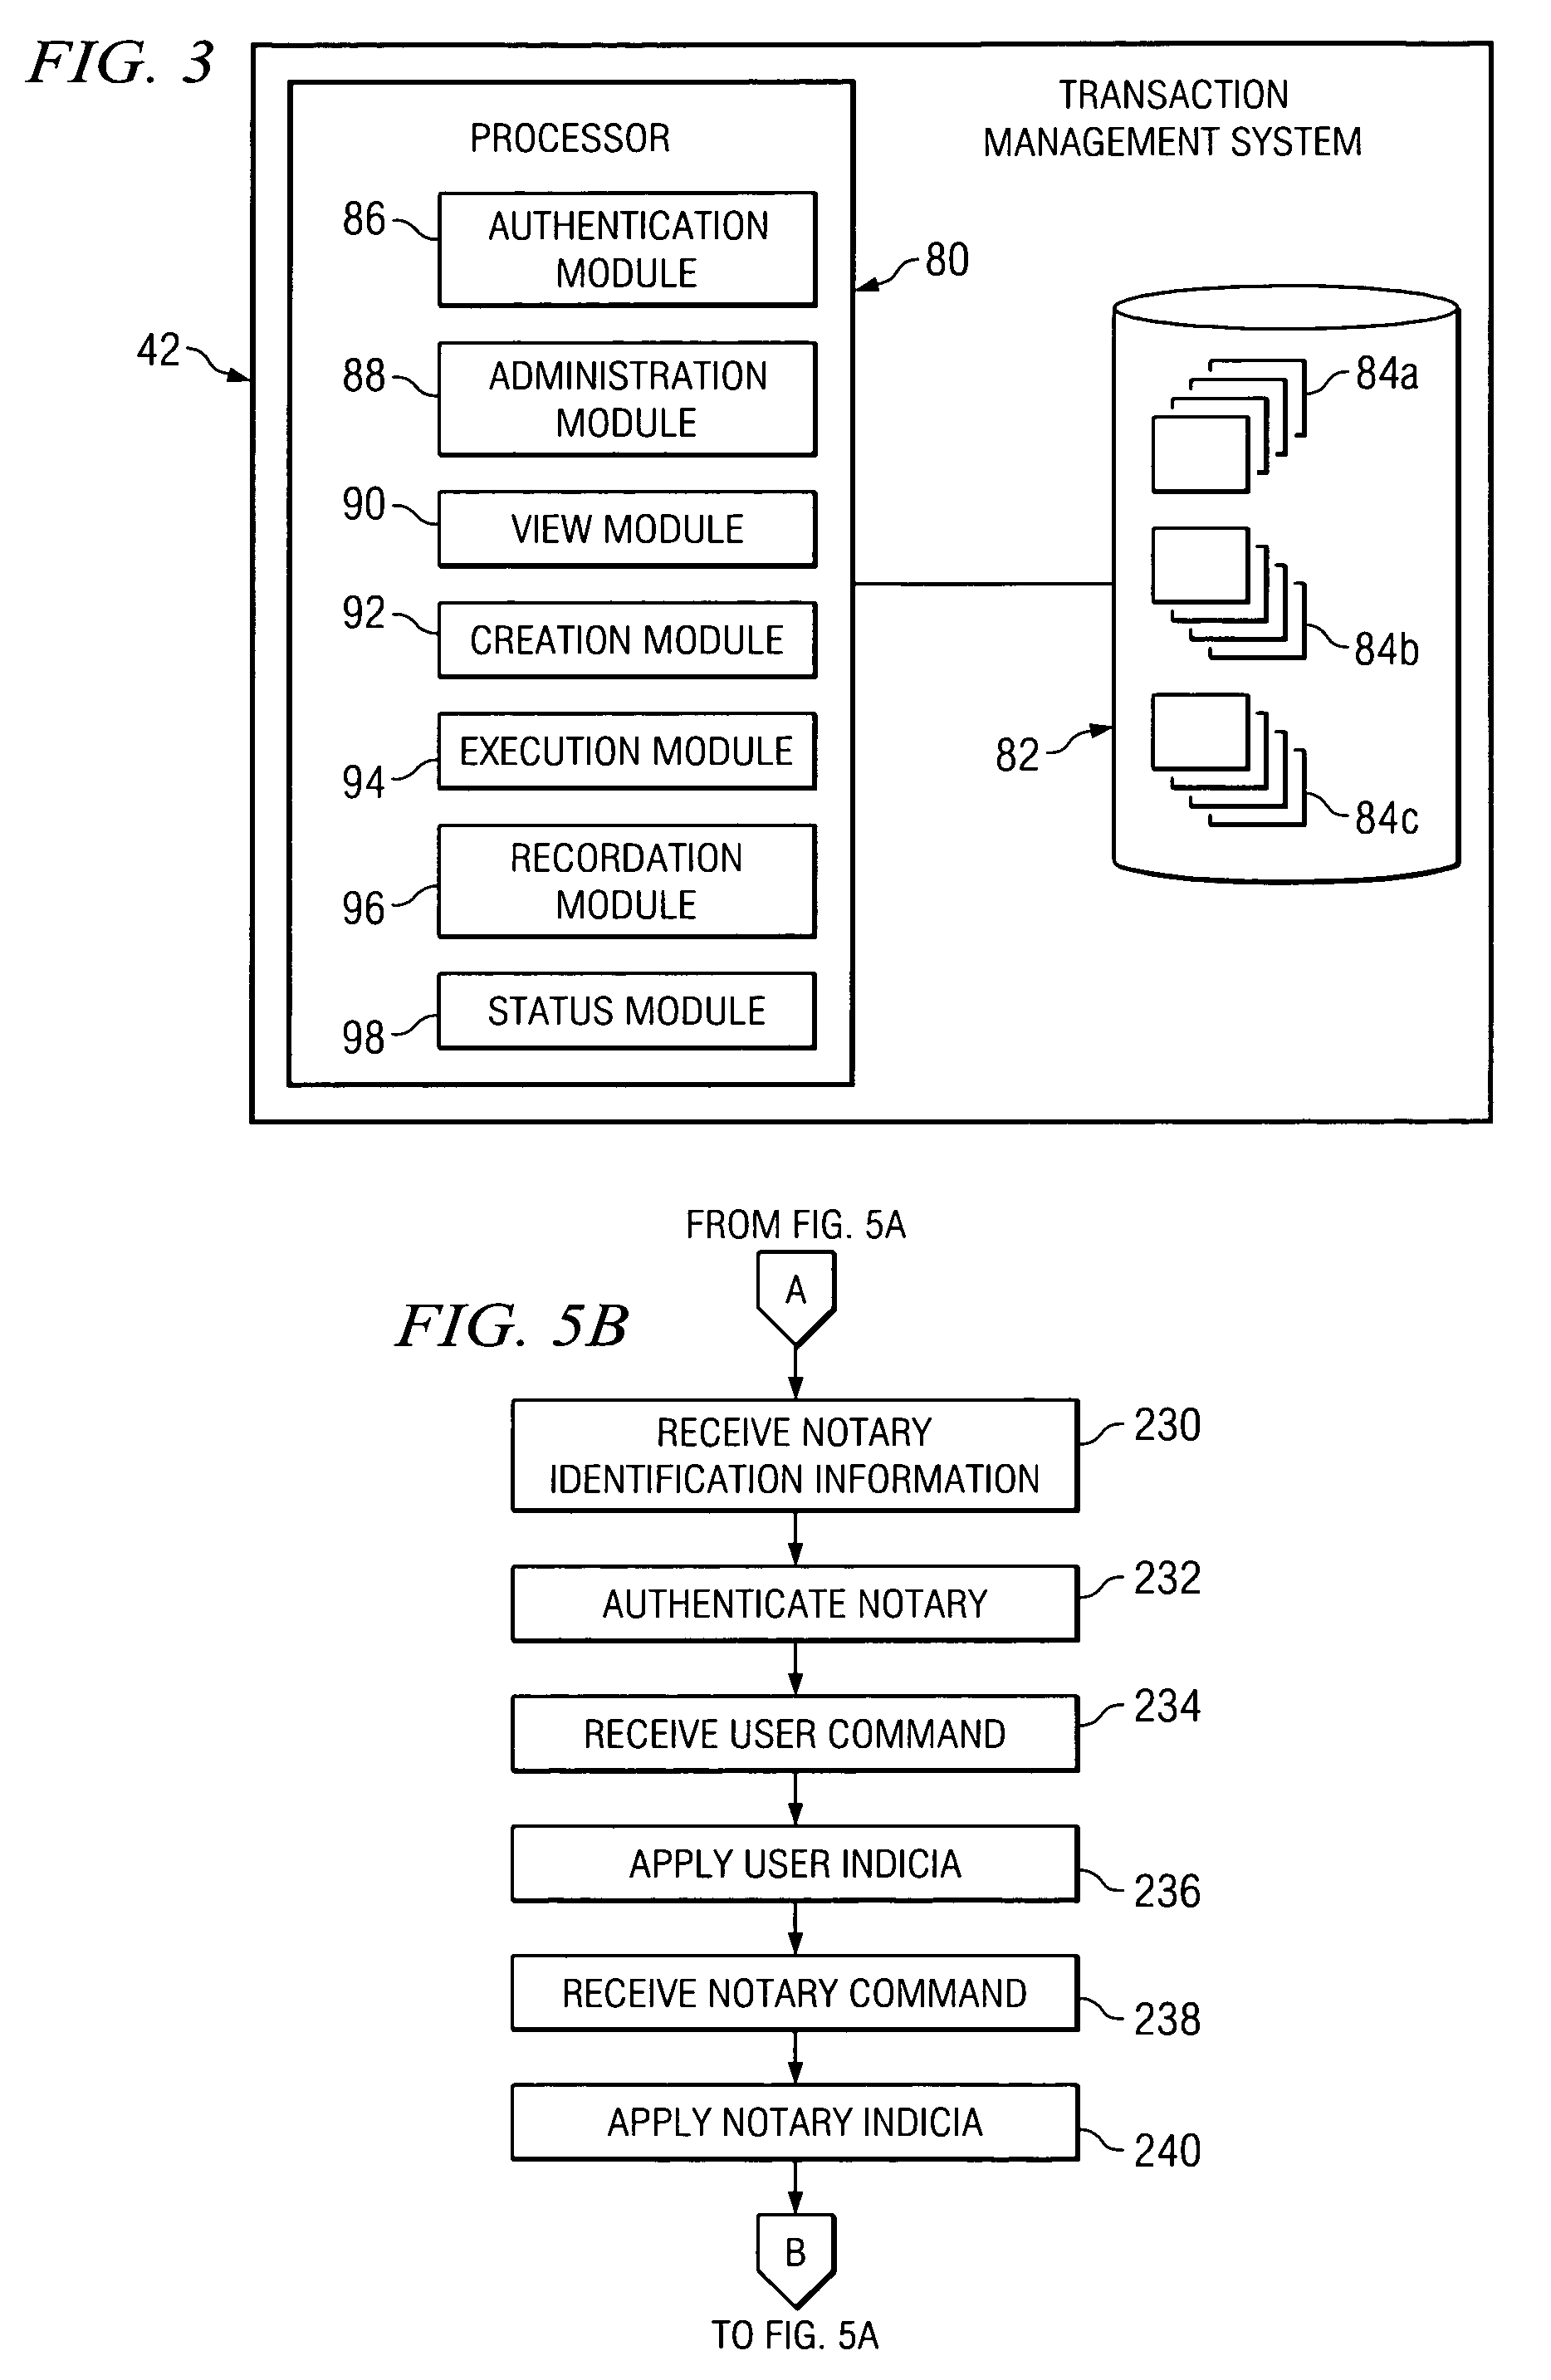 System and method for the electronic management and execution of transaction documents